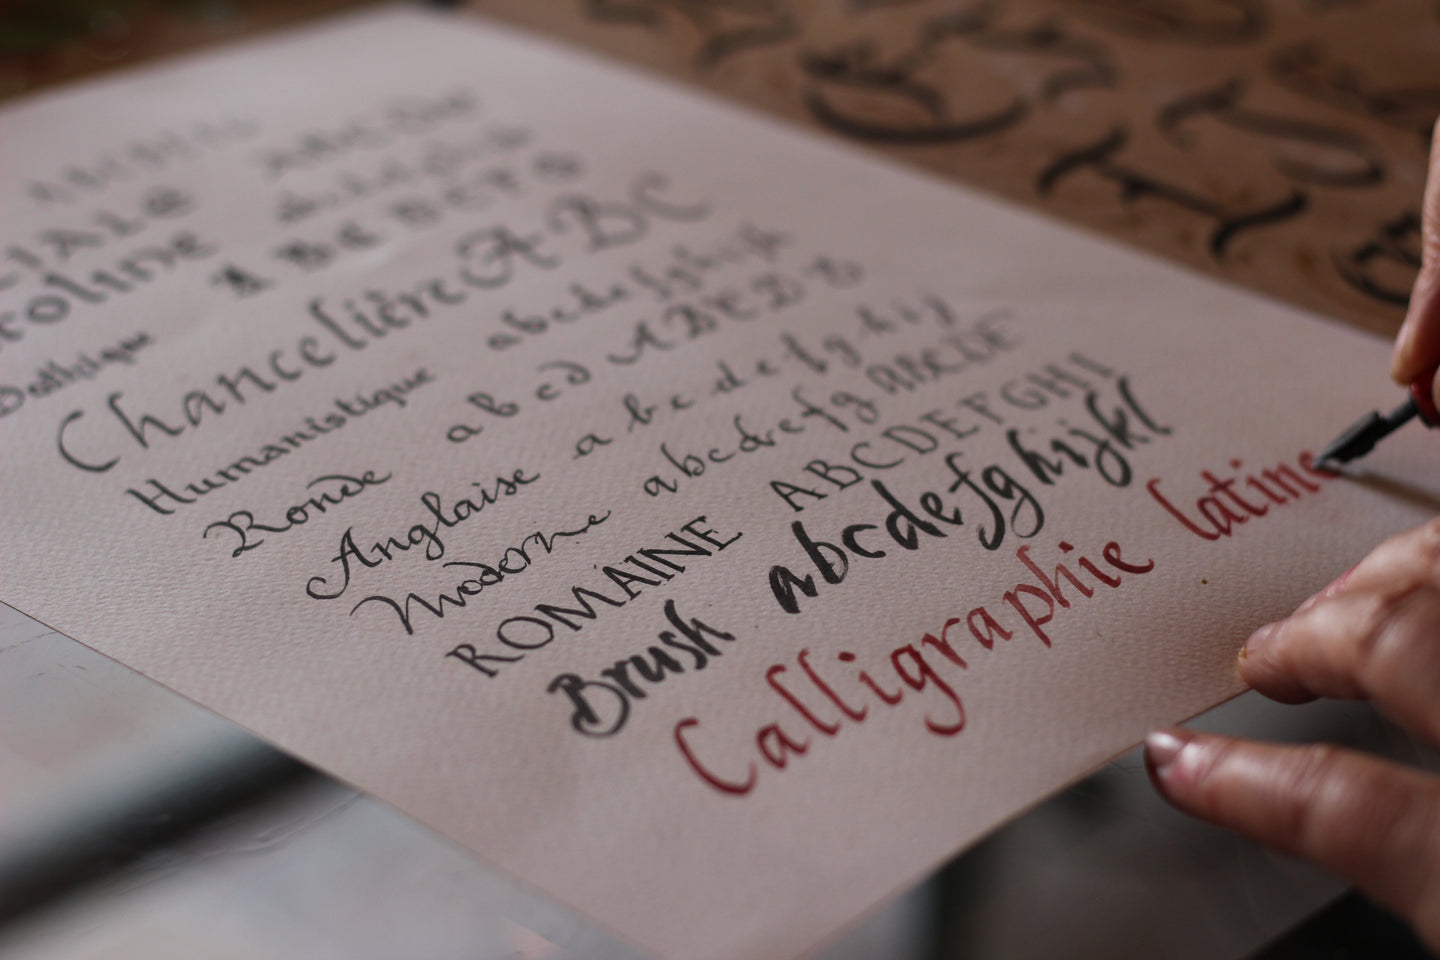 Your letter in calligraphy 